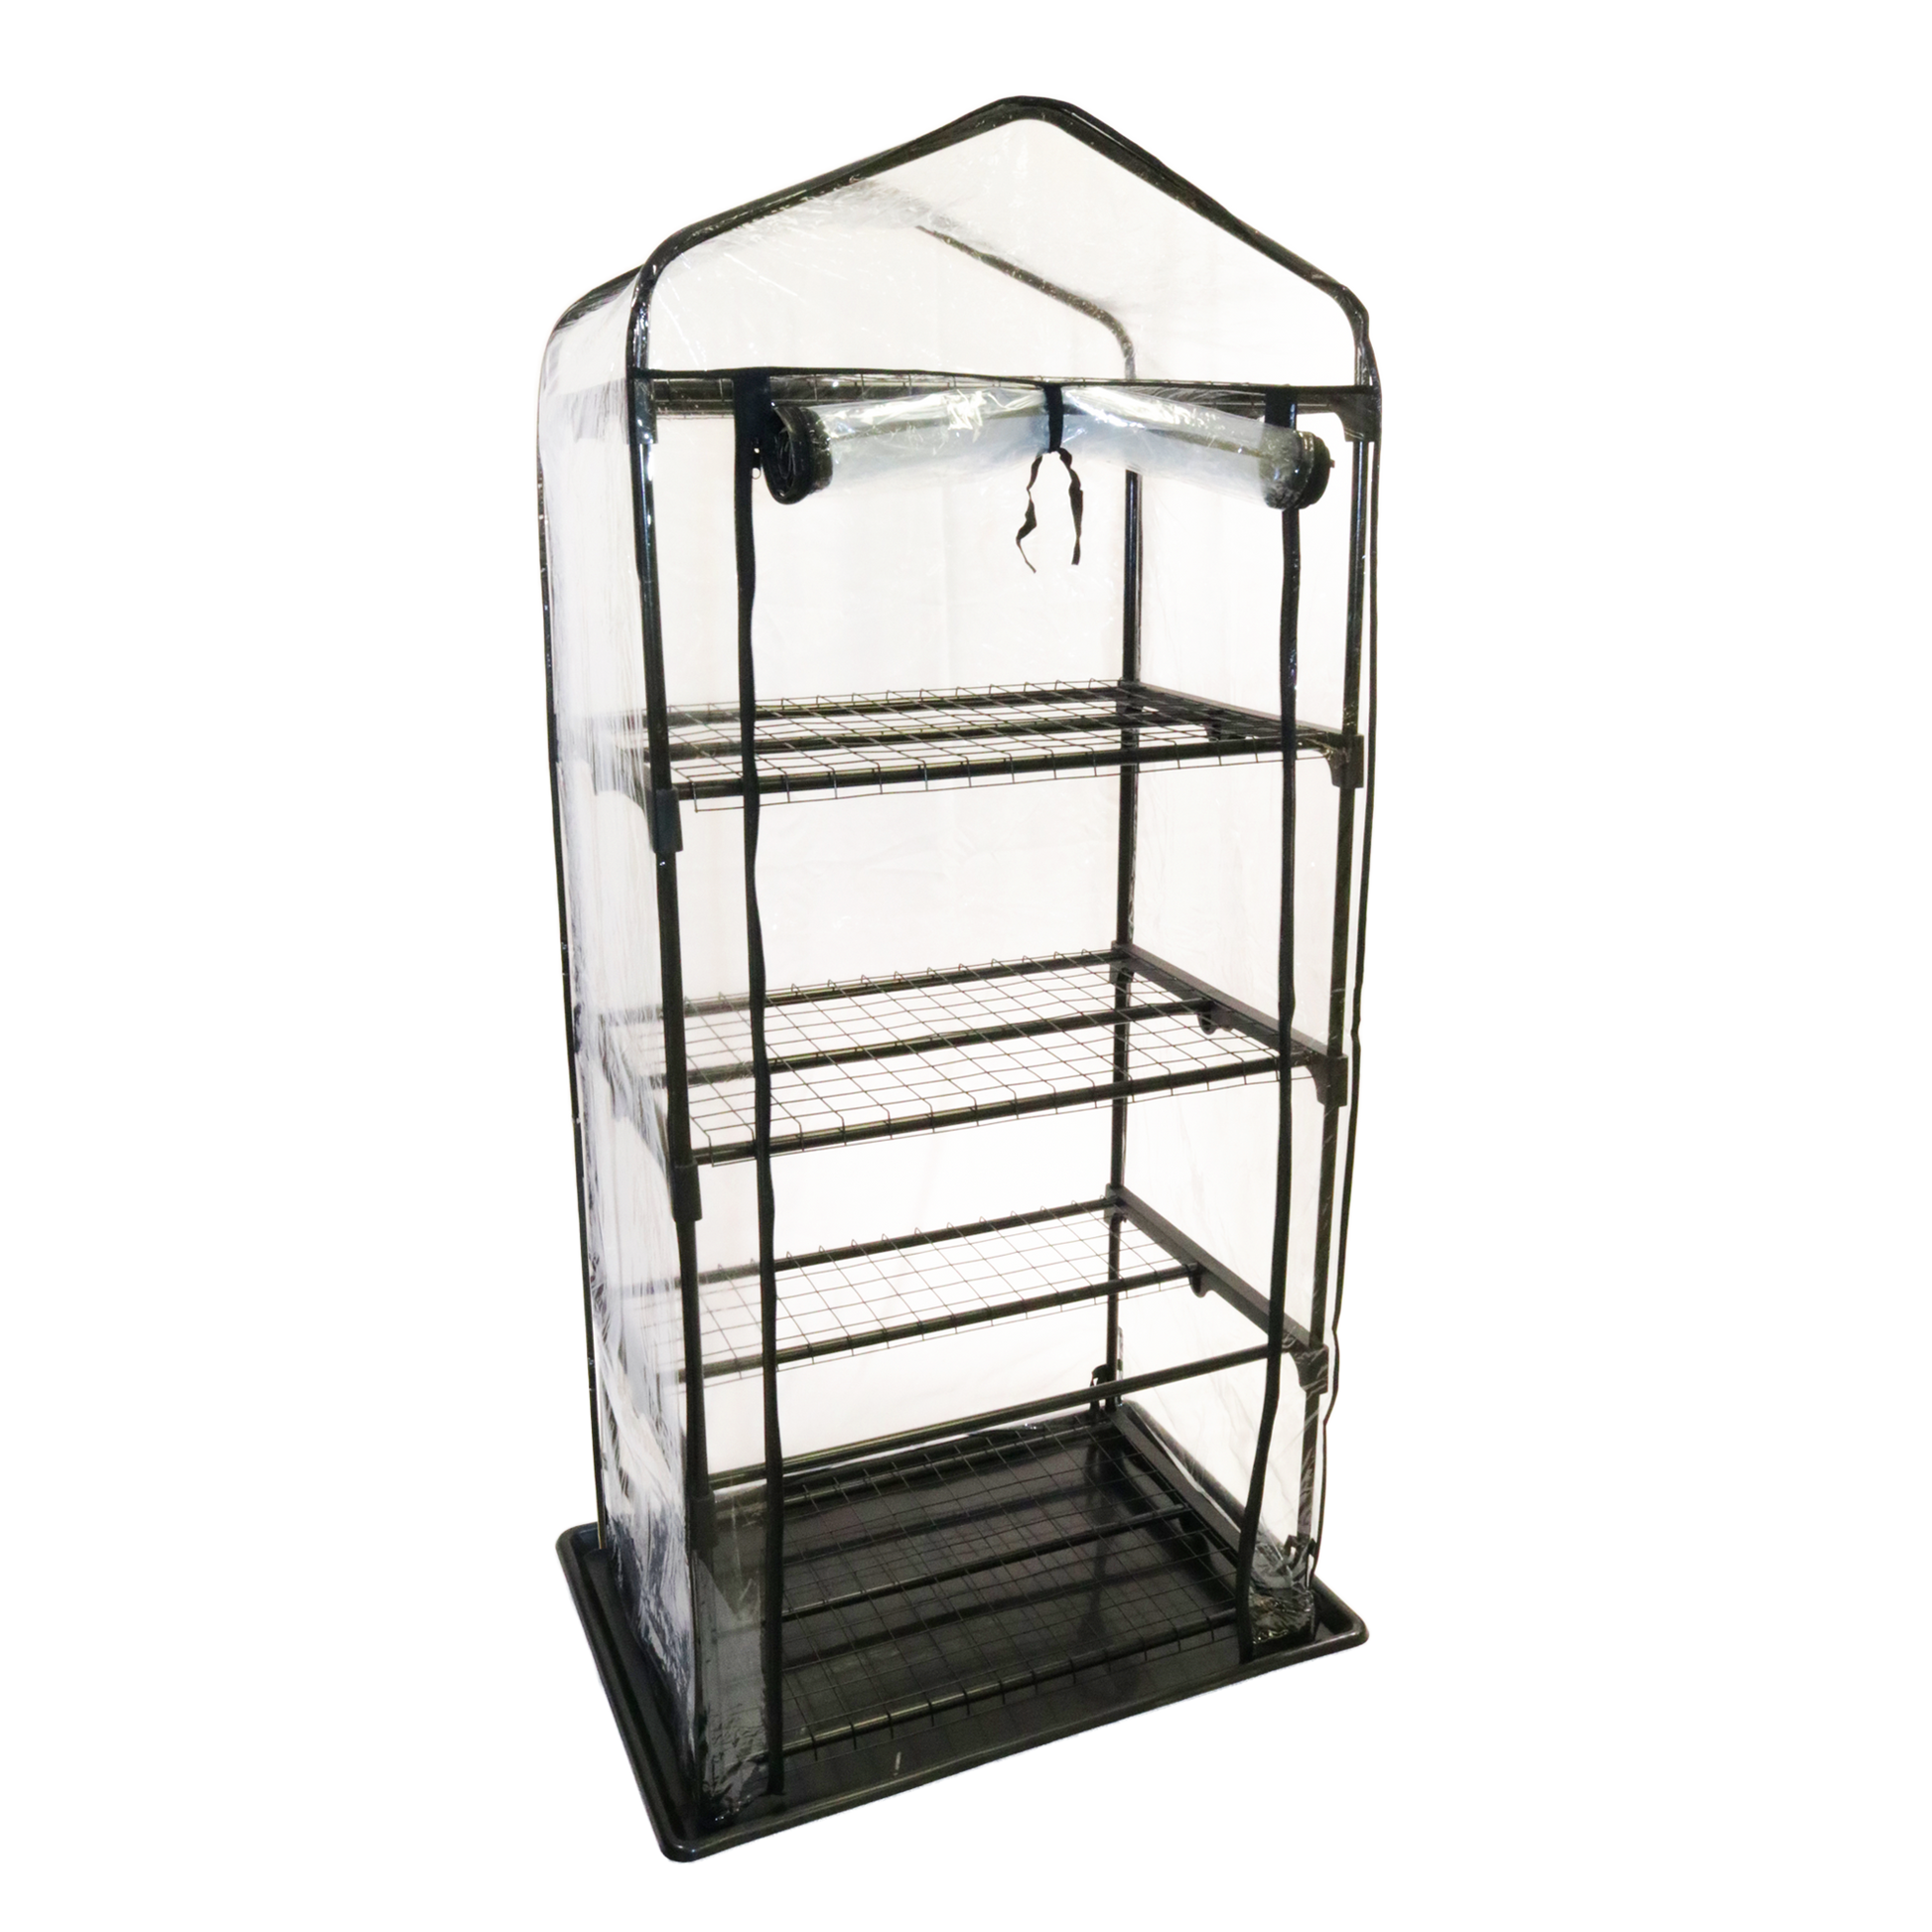 A small, transparent grow tent with a metal frame and shelves, designed for indoor plant cultivation and mycology.